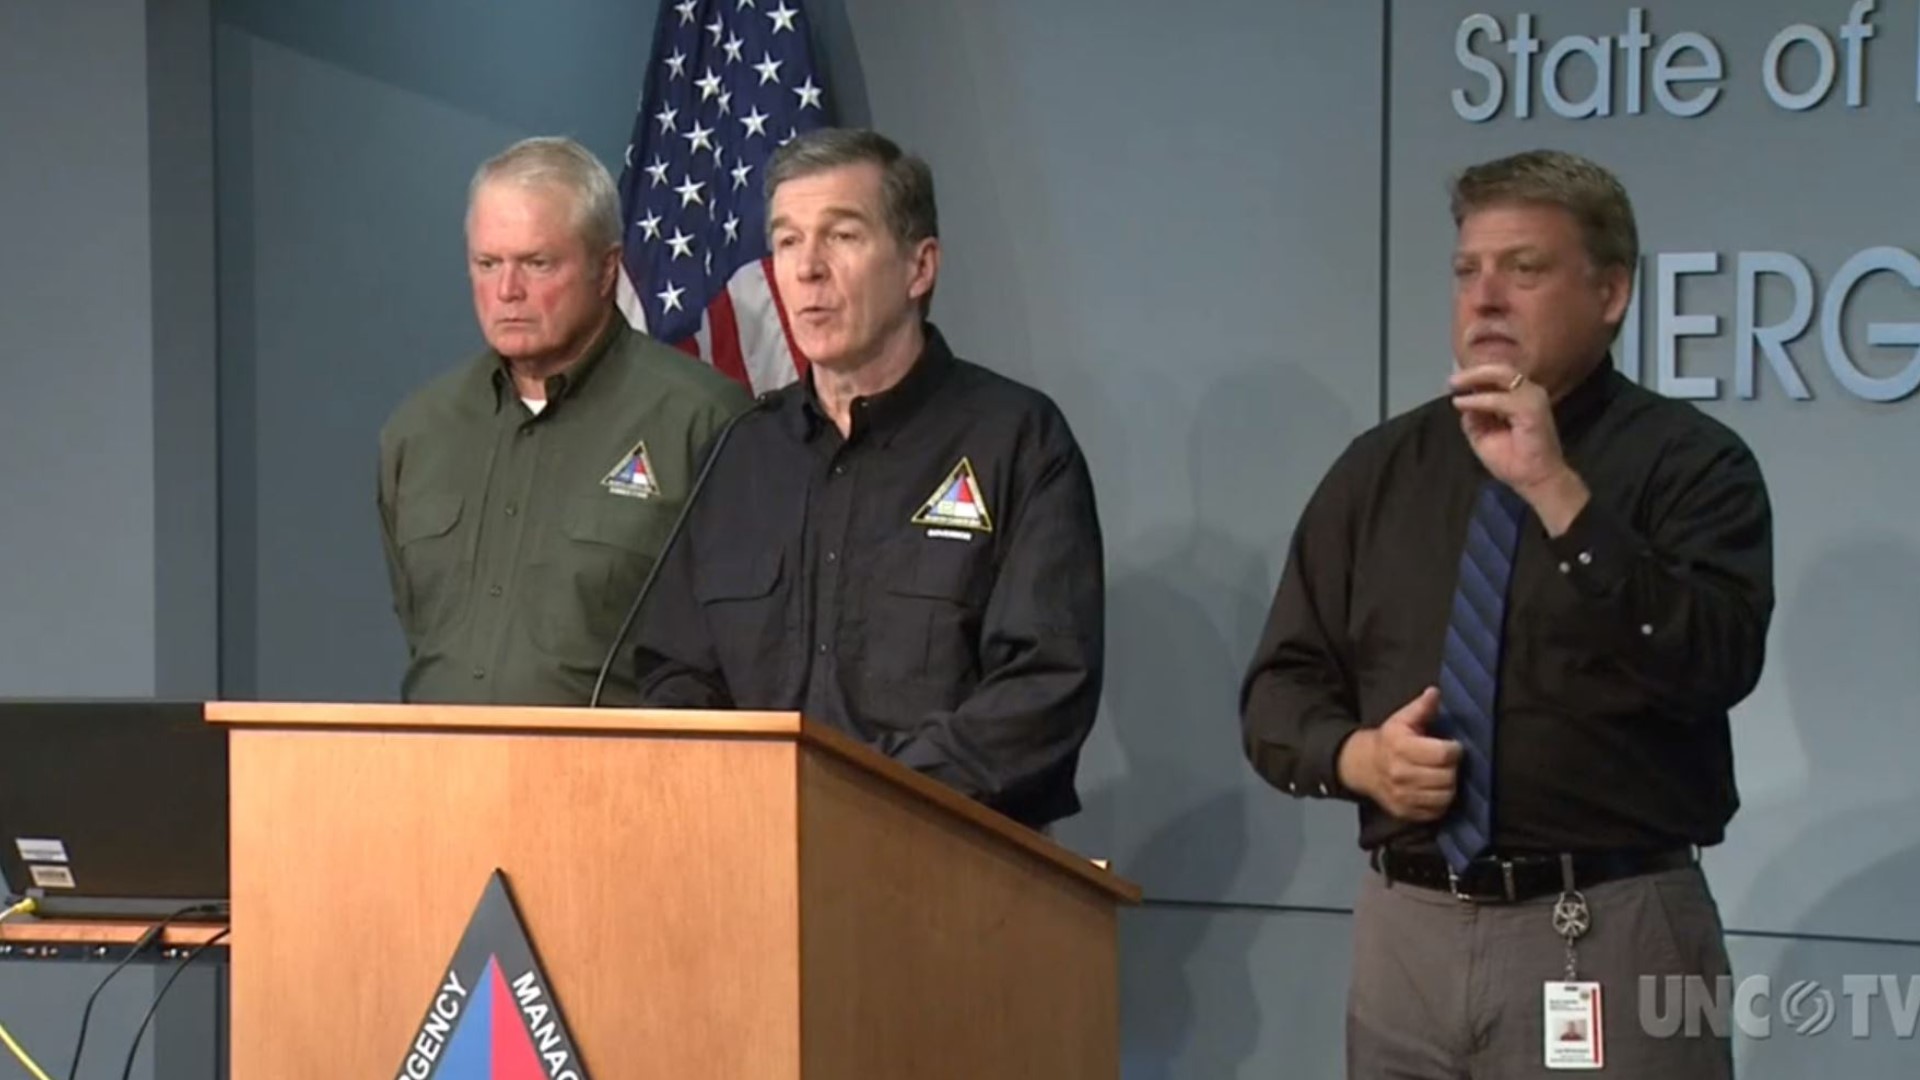 Gov. Roy Cooper gives information on plans and preps for Hurricane Dorian. The monster storm could impact the North Carolina coast by mid-week. Dorian slam the Bahamas Sunday as a Category 5 storm with wind gusts of up to 200 mph.